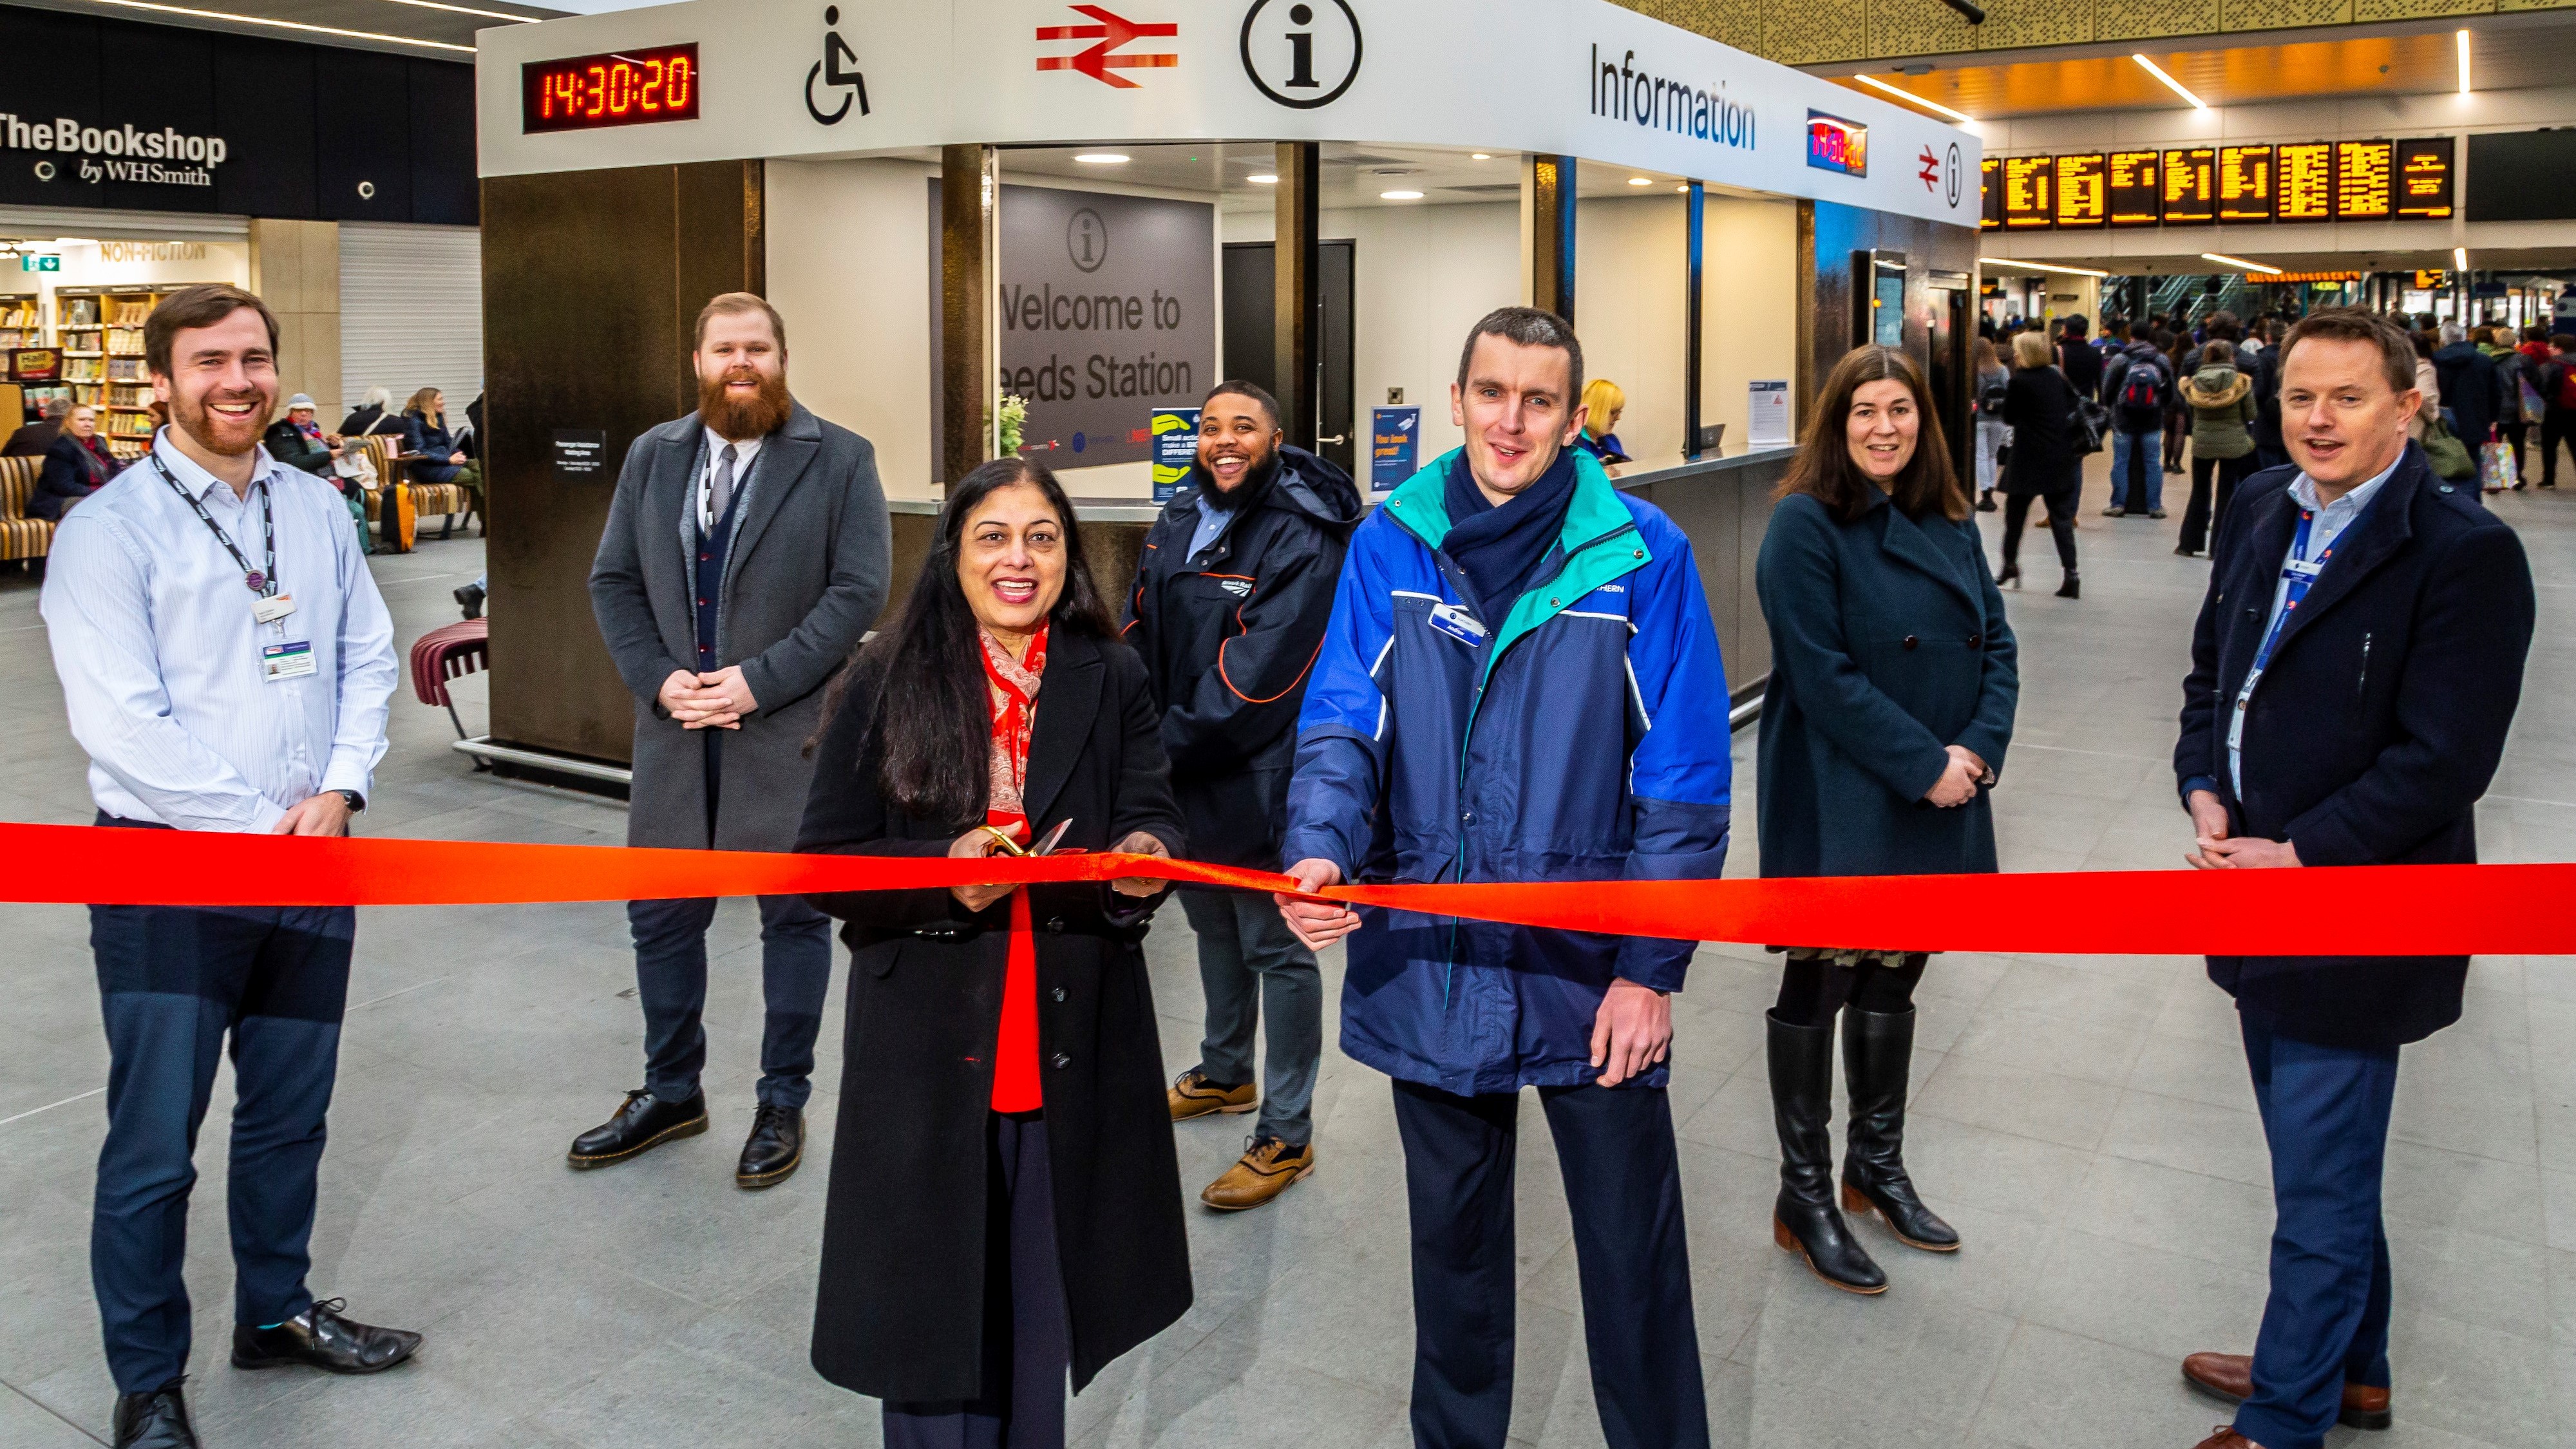 Staff open the new Customer Information Point at Leeds station